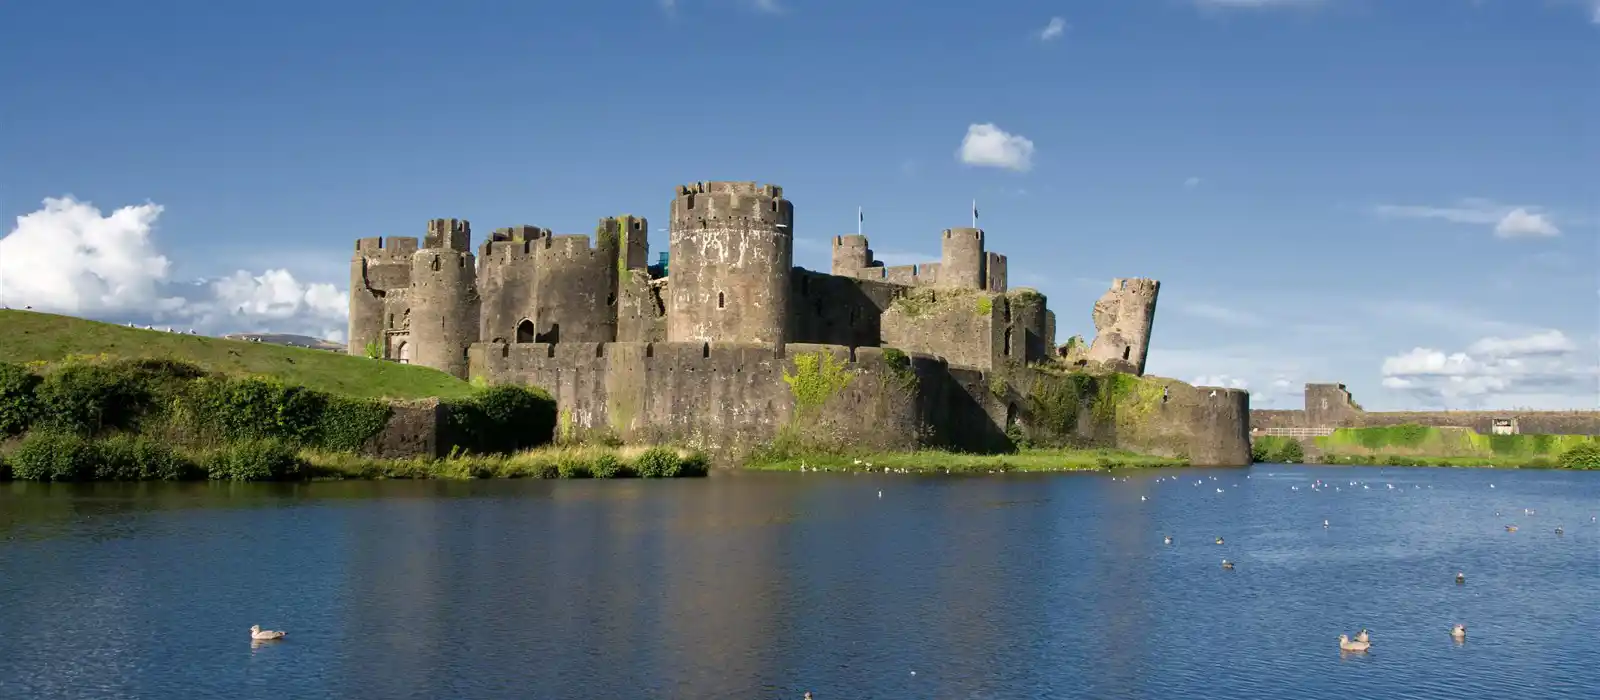 The ruins of Castle Caerphilly, Caerphilly